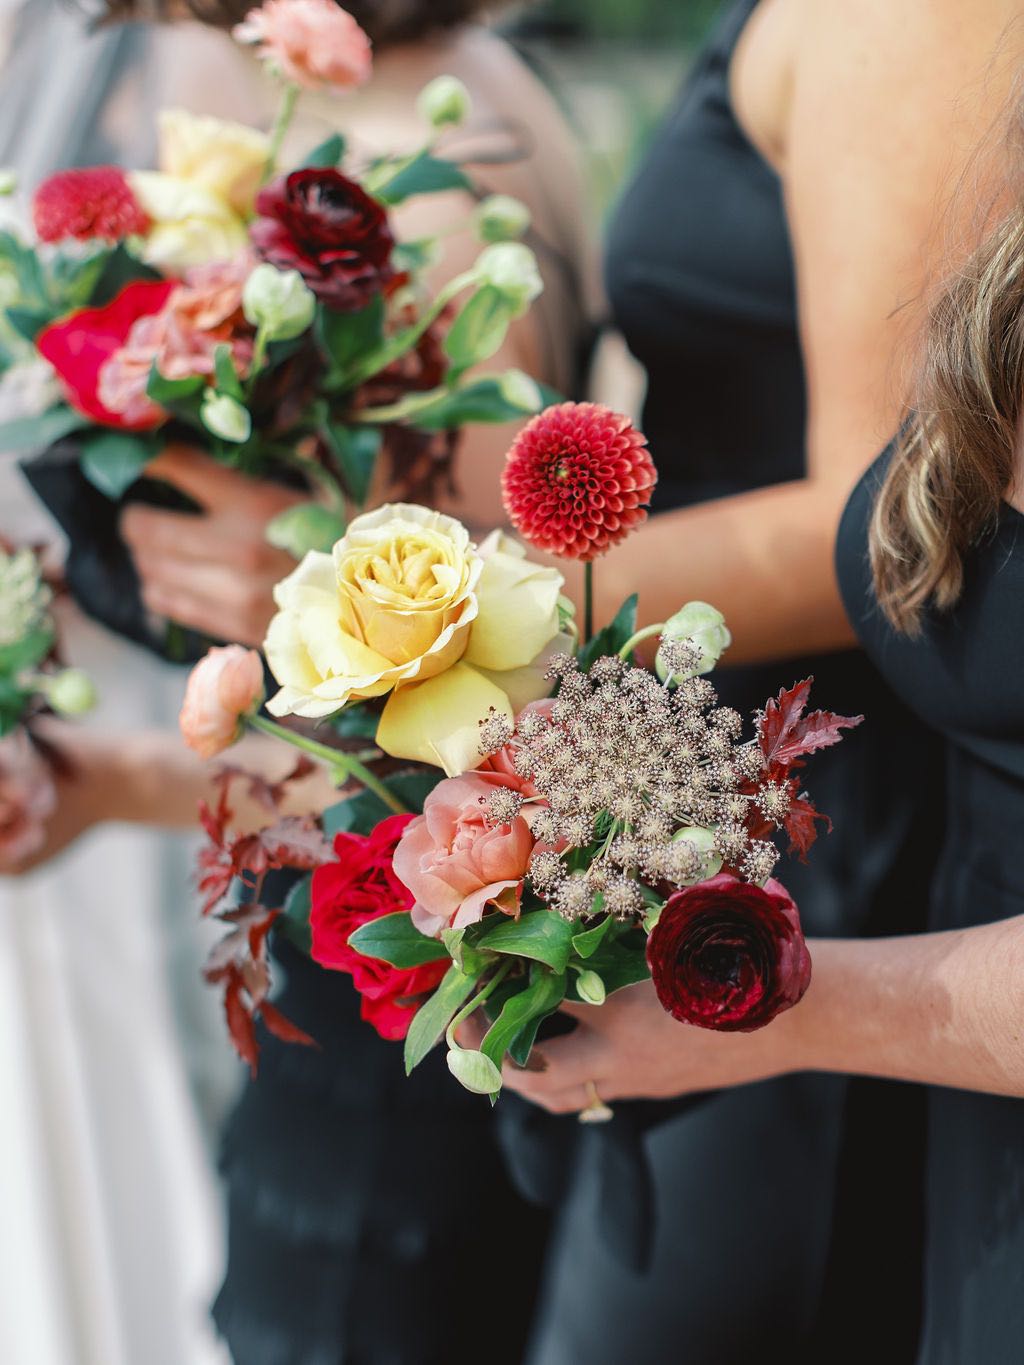 Small bridesmaid bouquets with buttery yellow, plum and maroon flowers